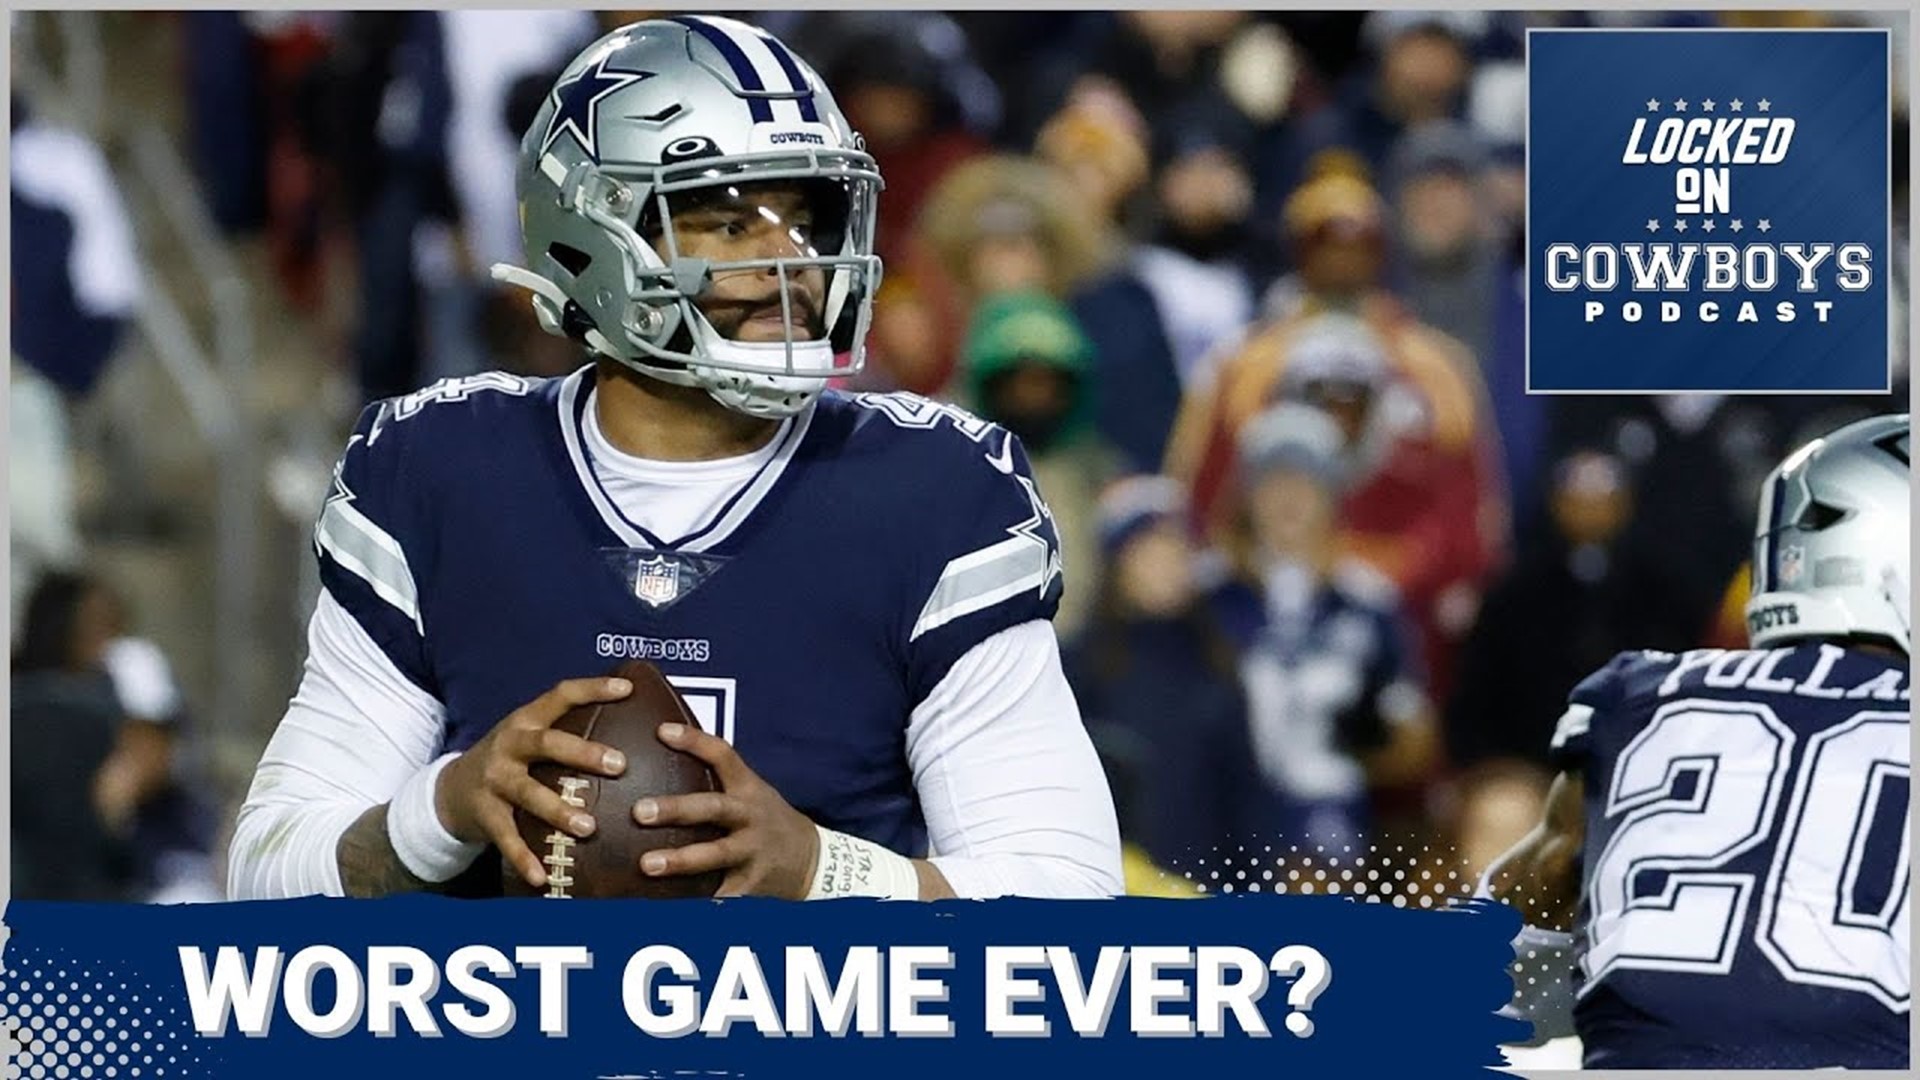 Marcus Mosher & Landon McCool discuss if Dak Prescott played his worst game ever in Week 18. Plus: What's up with the offensive line? And who'll start at CB vs. TB?